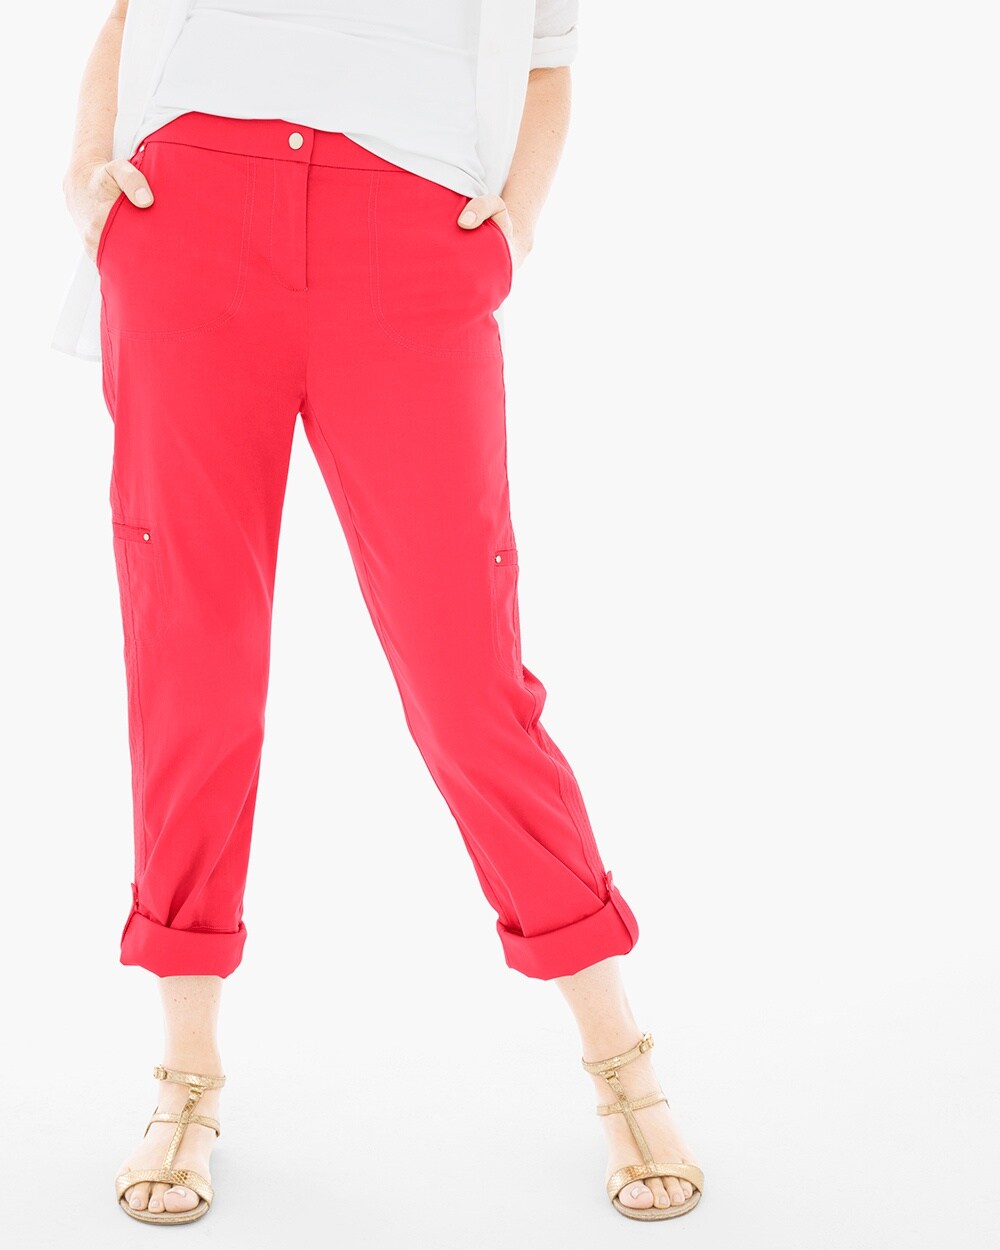 Luxe Twill Utility Crop Pants